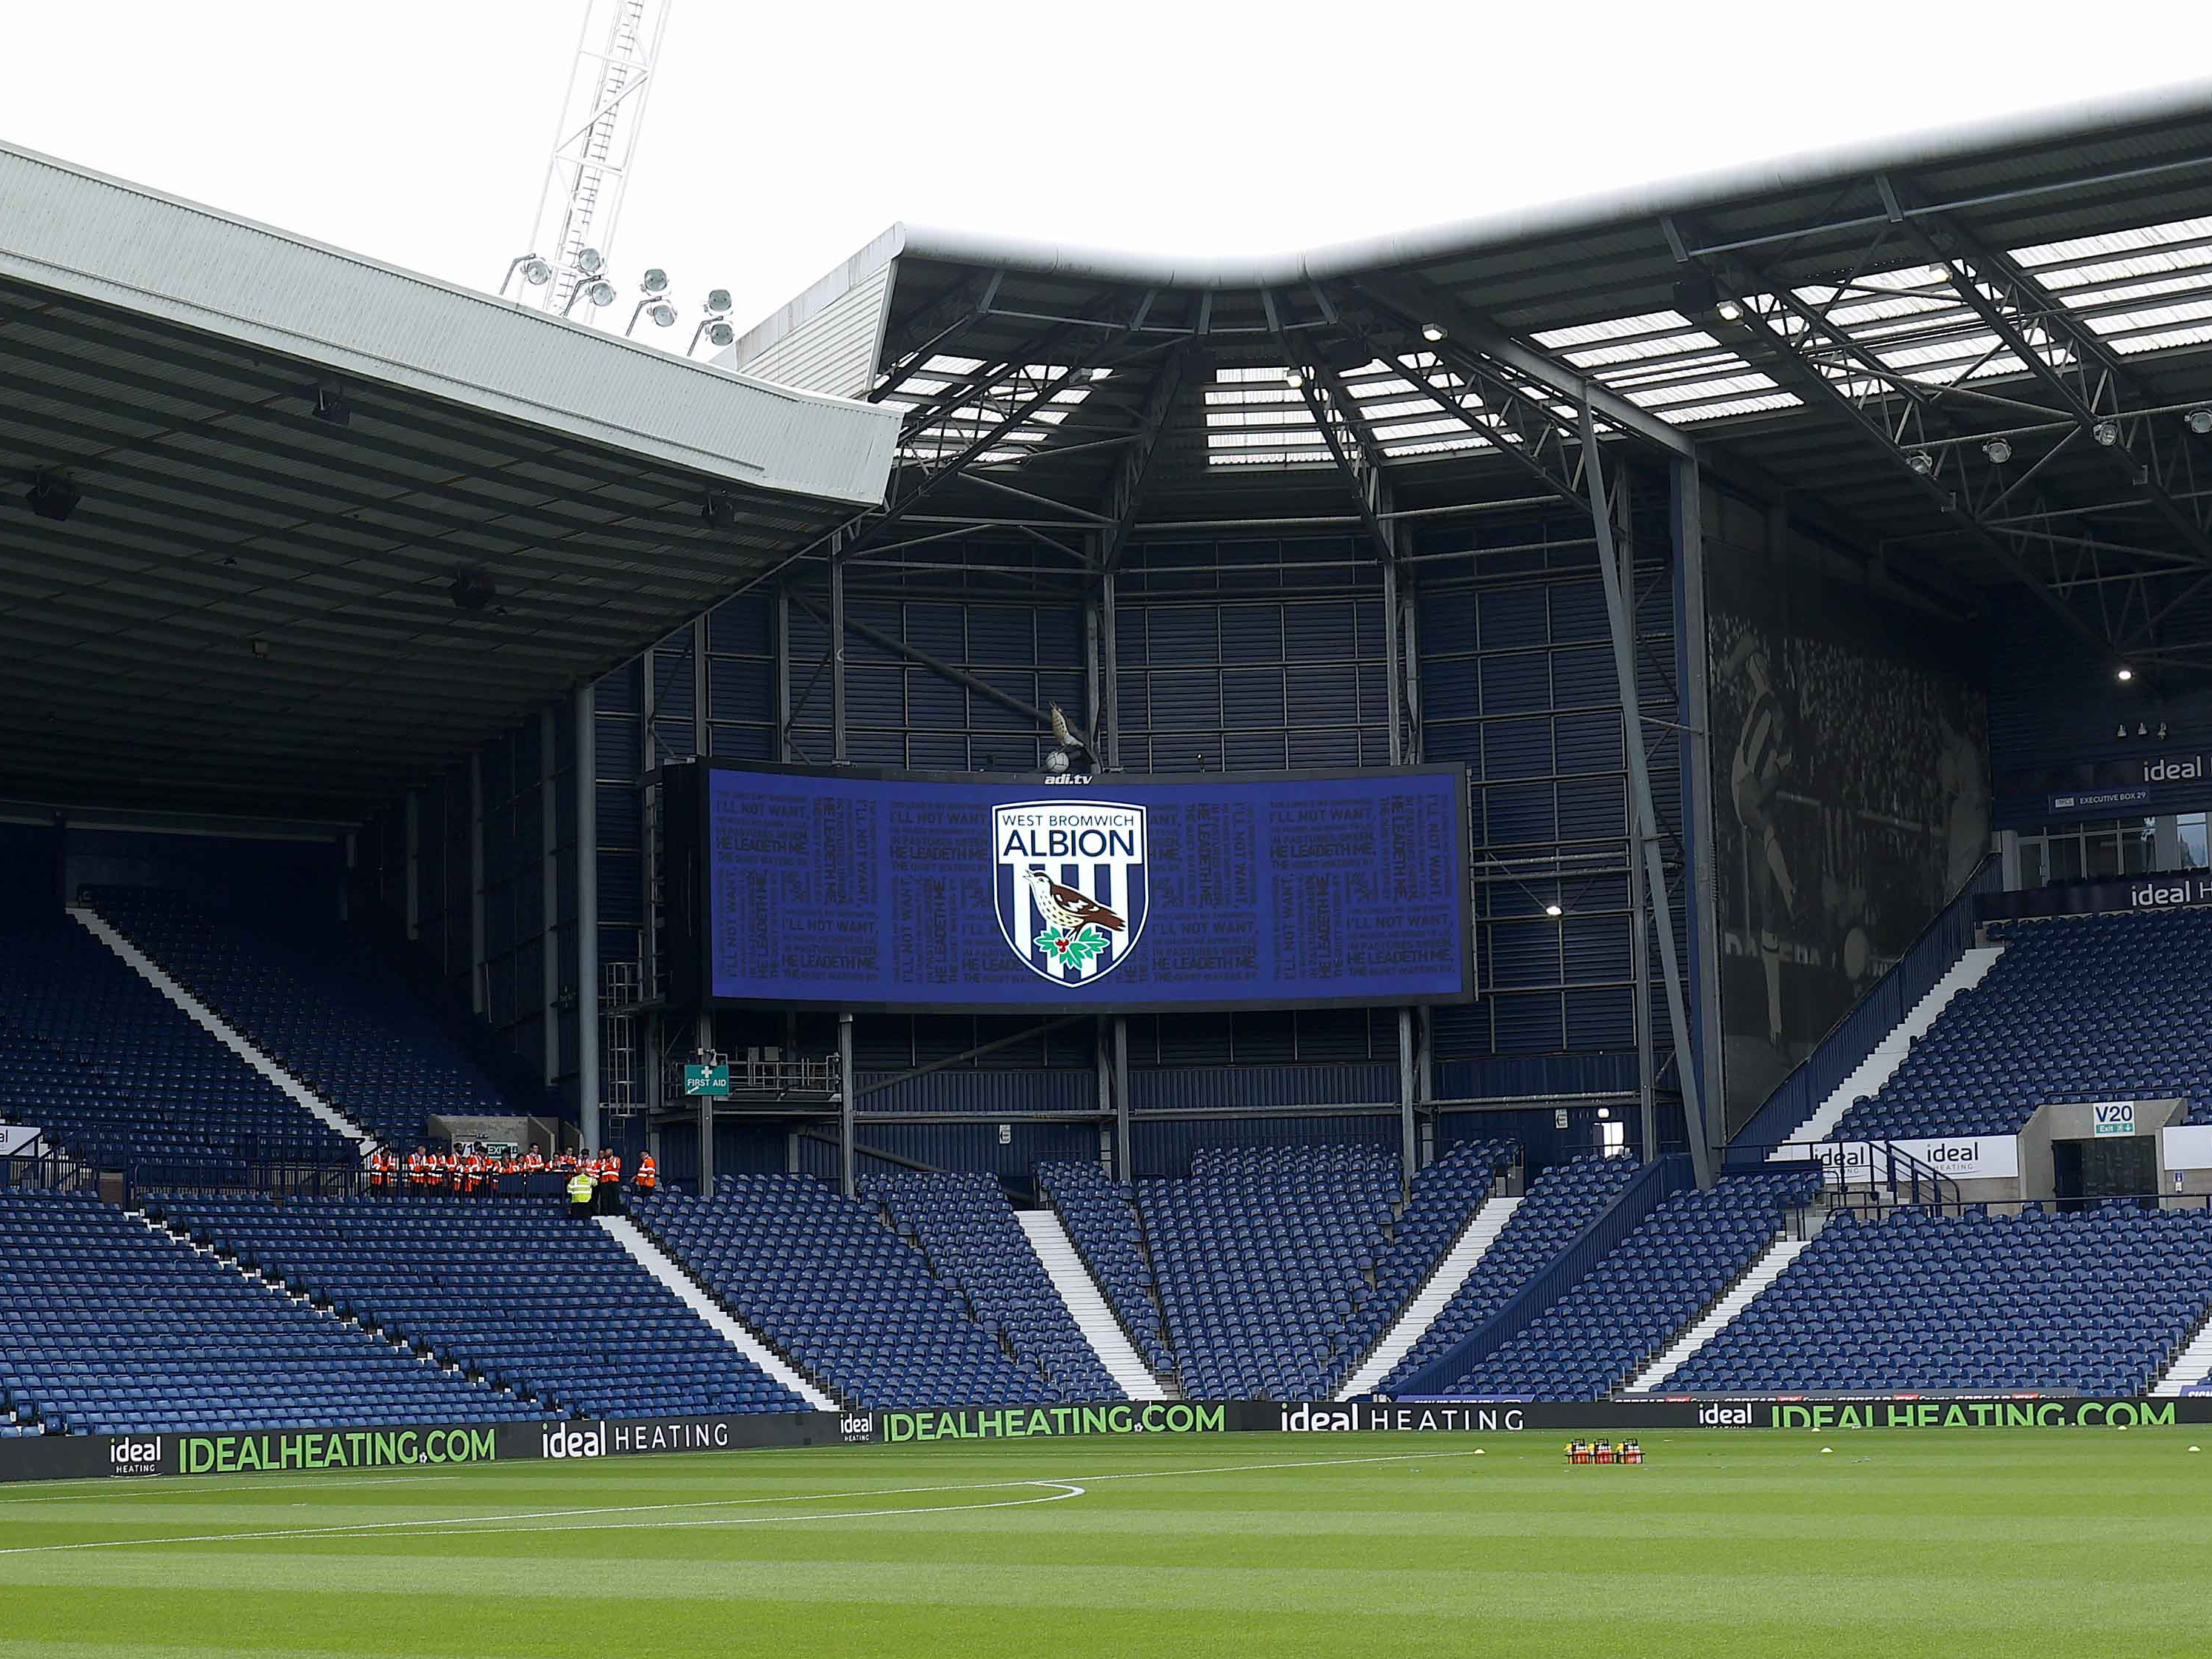 A general view of one of the big screens at The Hawthorns with a picture of an Albion badge